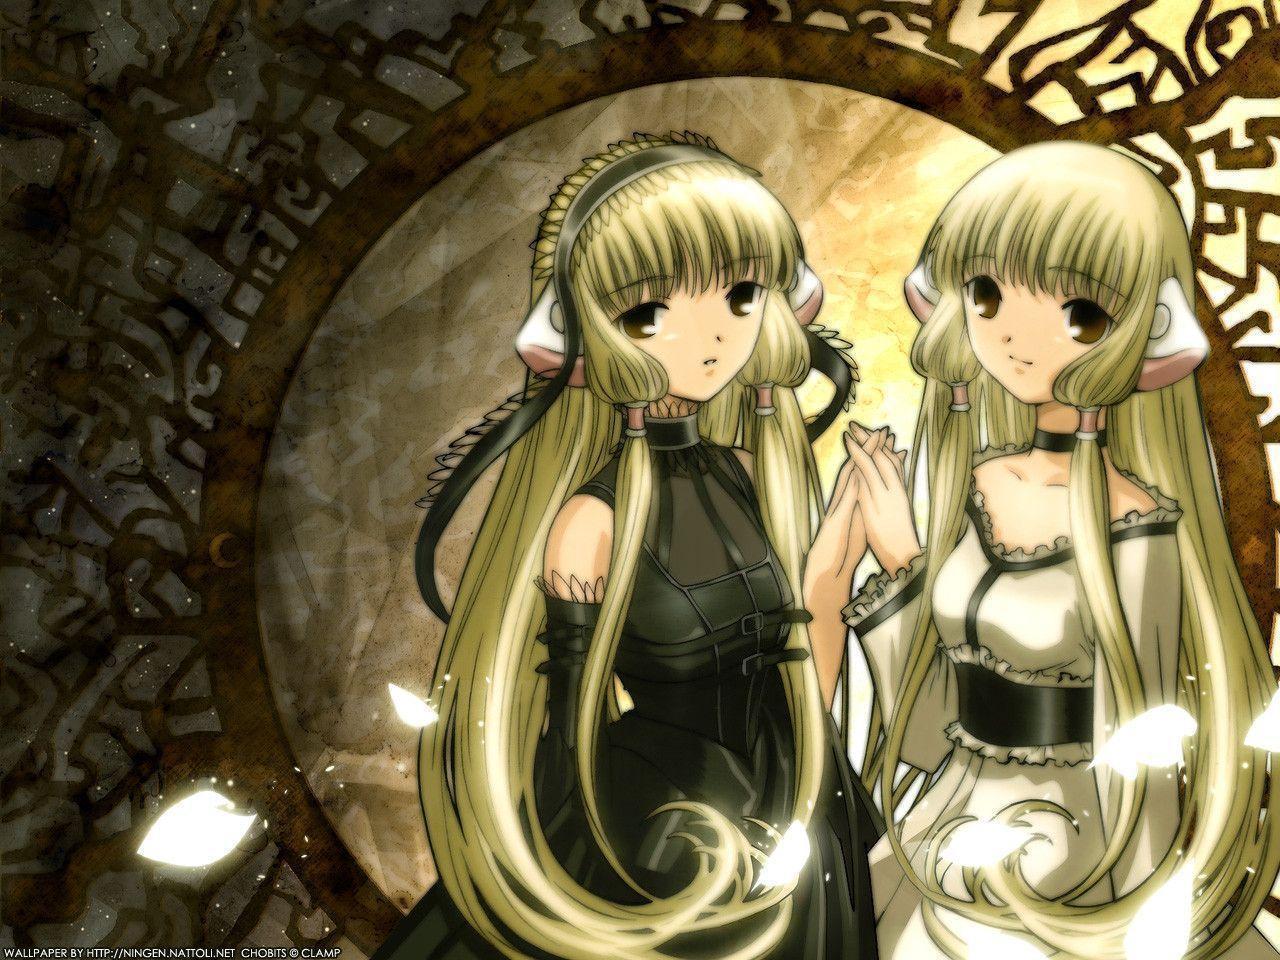 Chobits Chii, The fifth